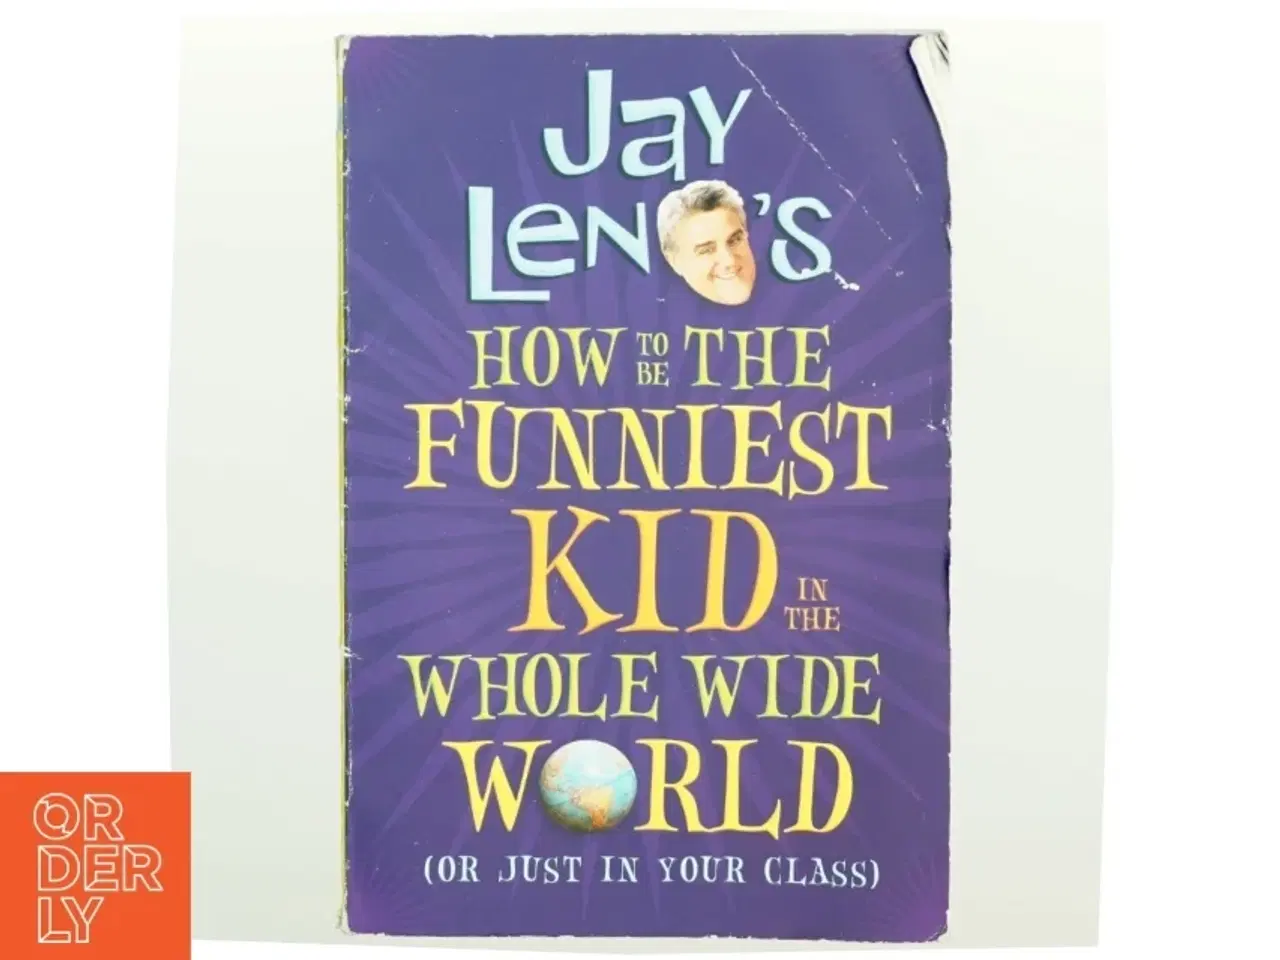 Billede 1 - Jay Leno's how to be the Funniest Kid in the Whole Wide World (or Just in Your Class) af Jay Leno (Bog)